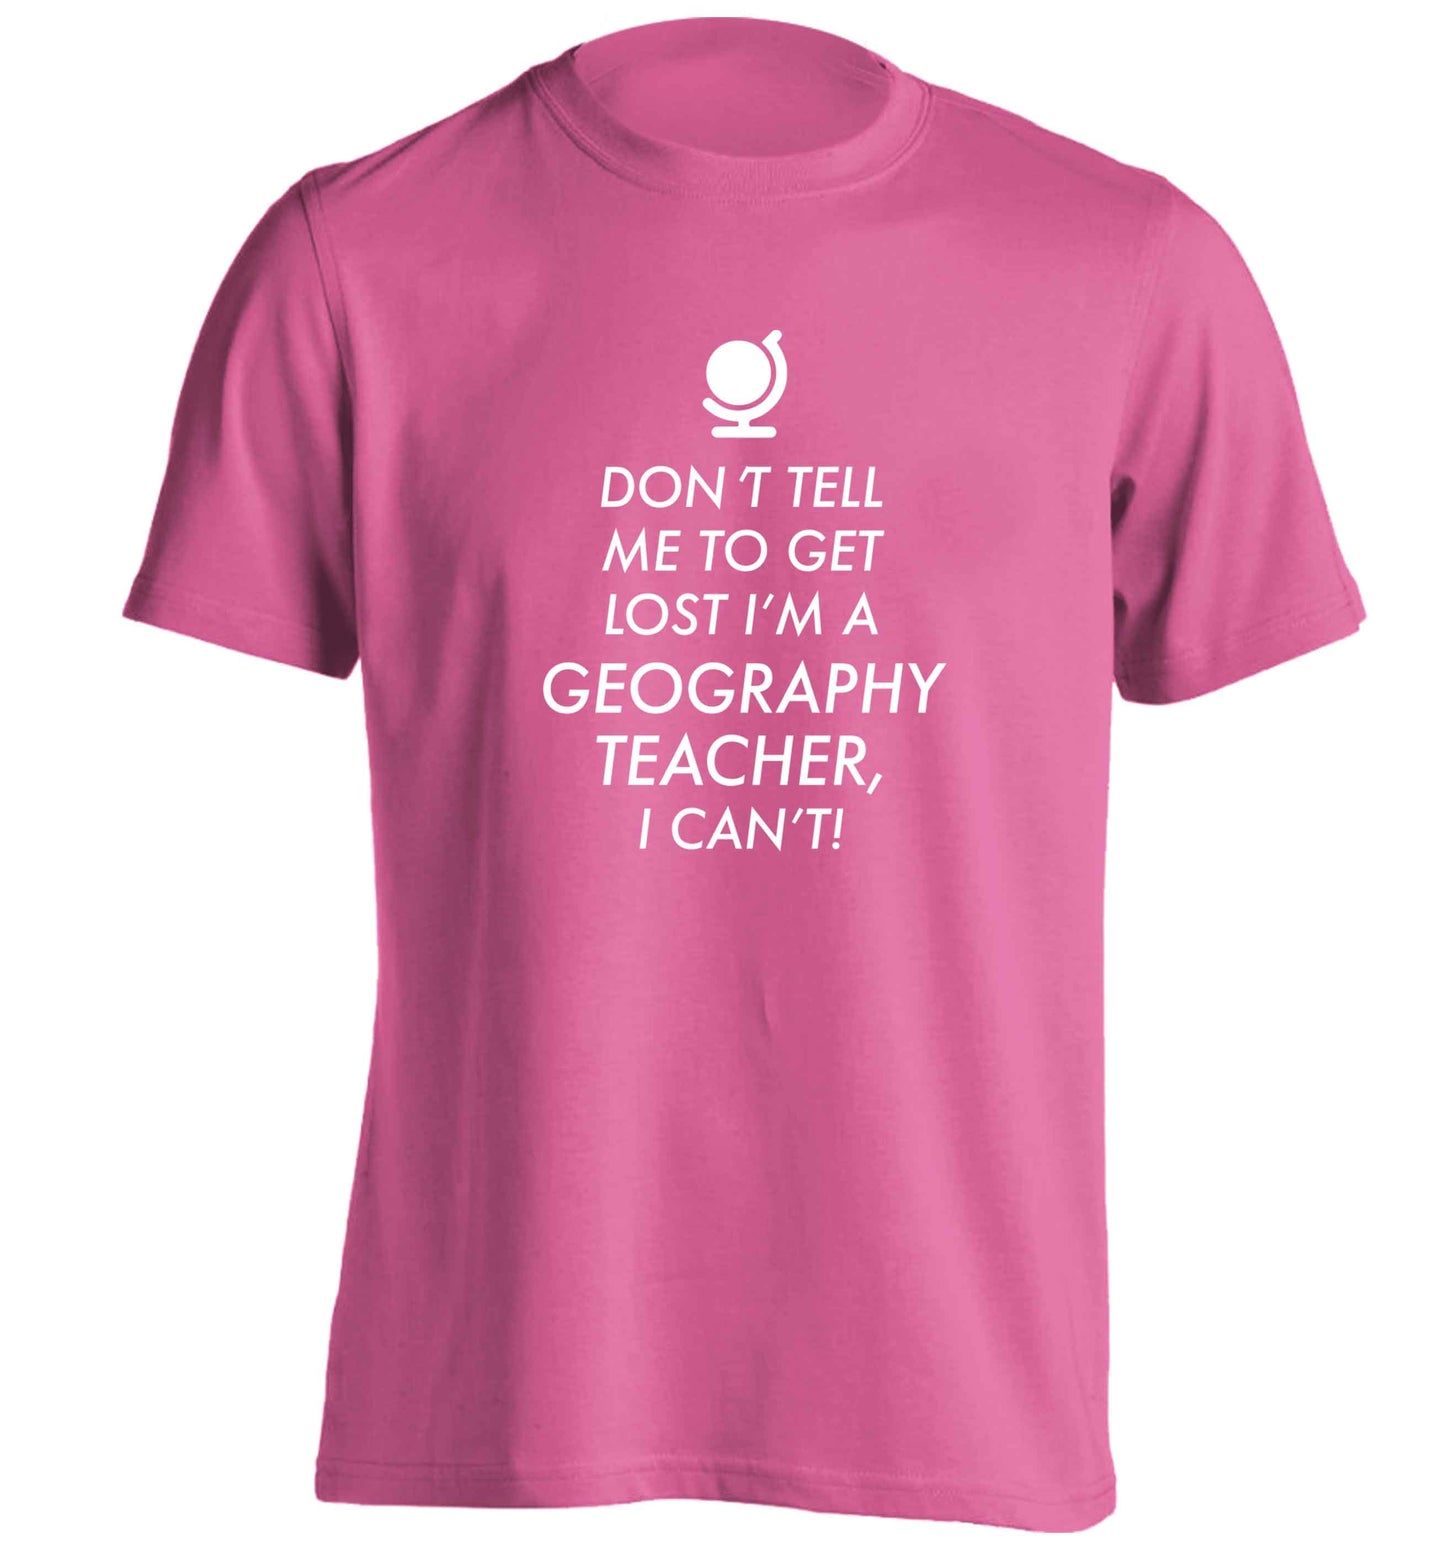 Don't tell me to get lost I'm a geography teacher, I can't adults unisex pink Tshirt 2XL